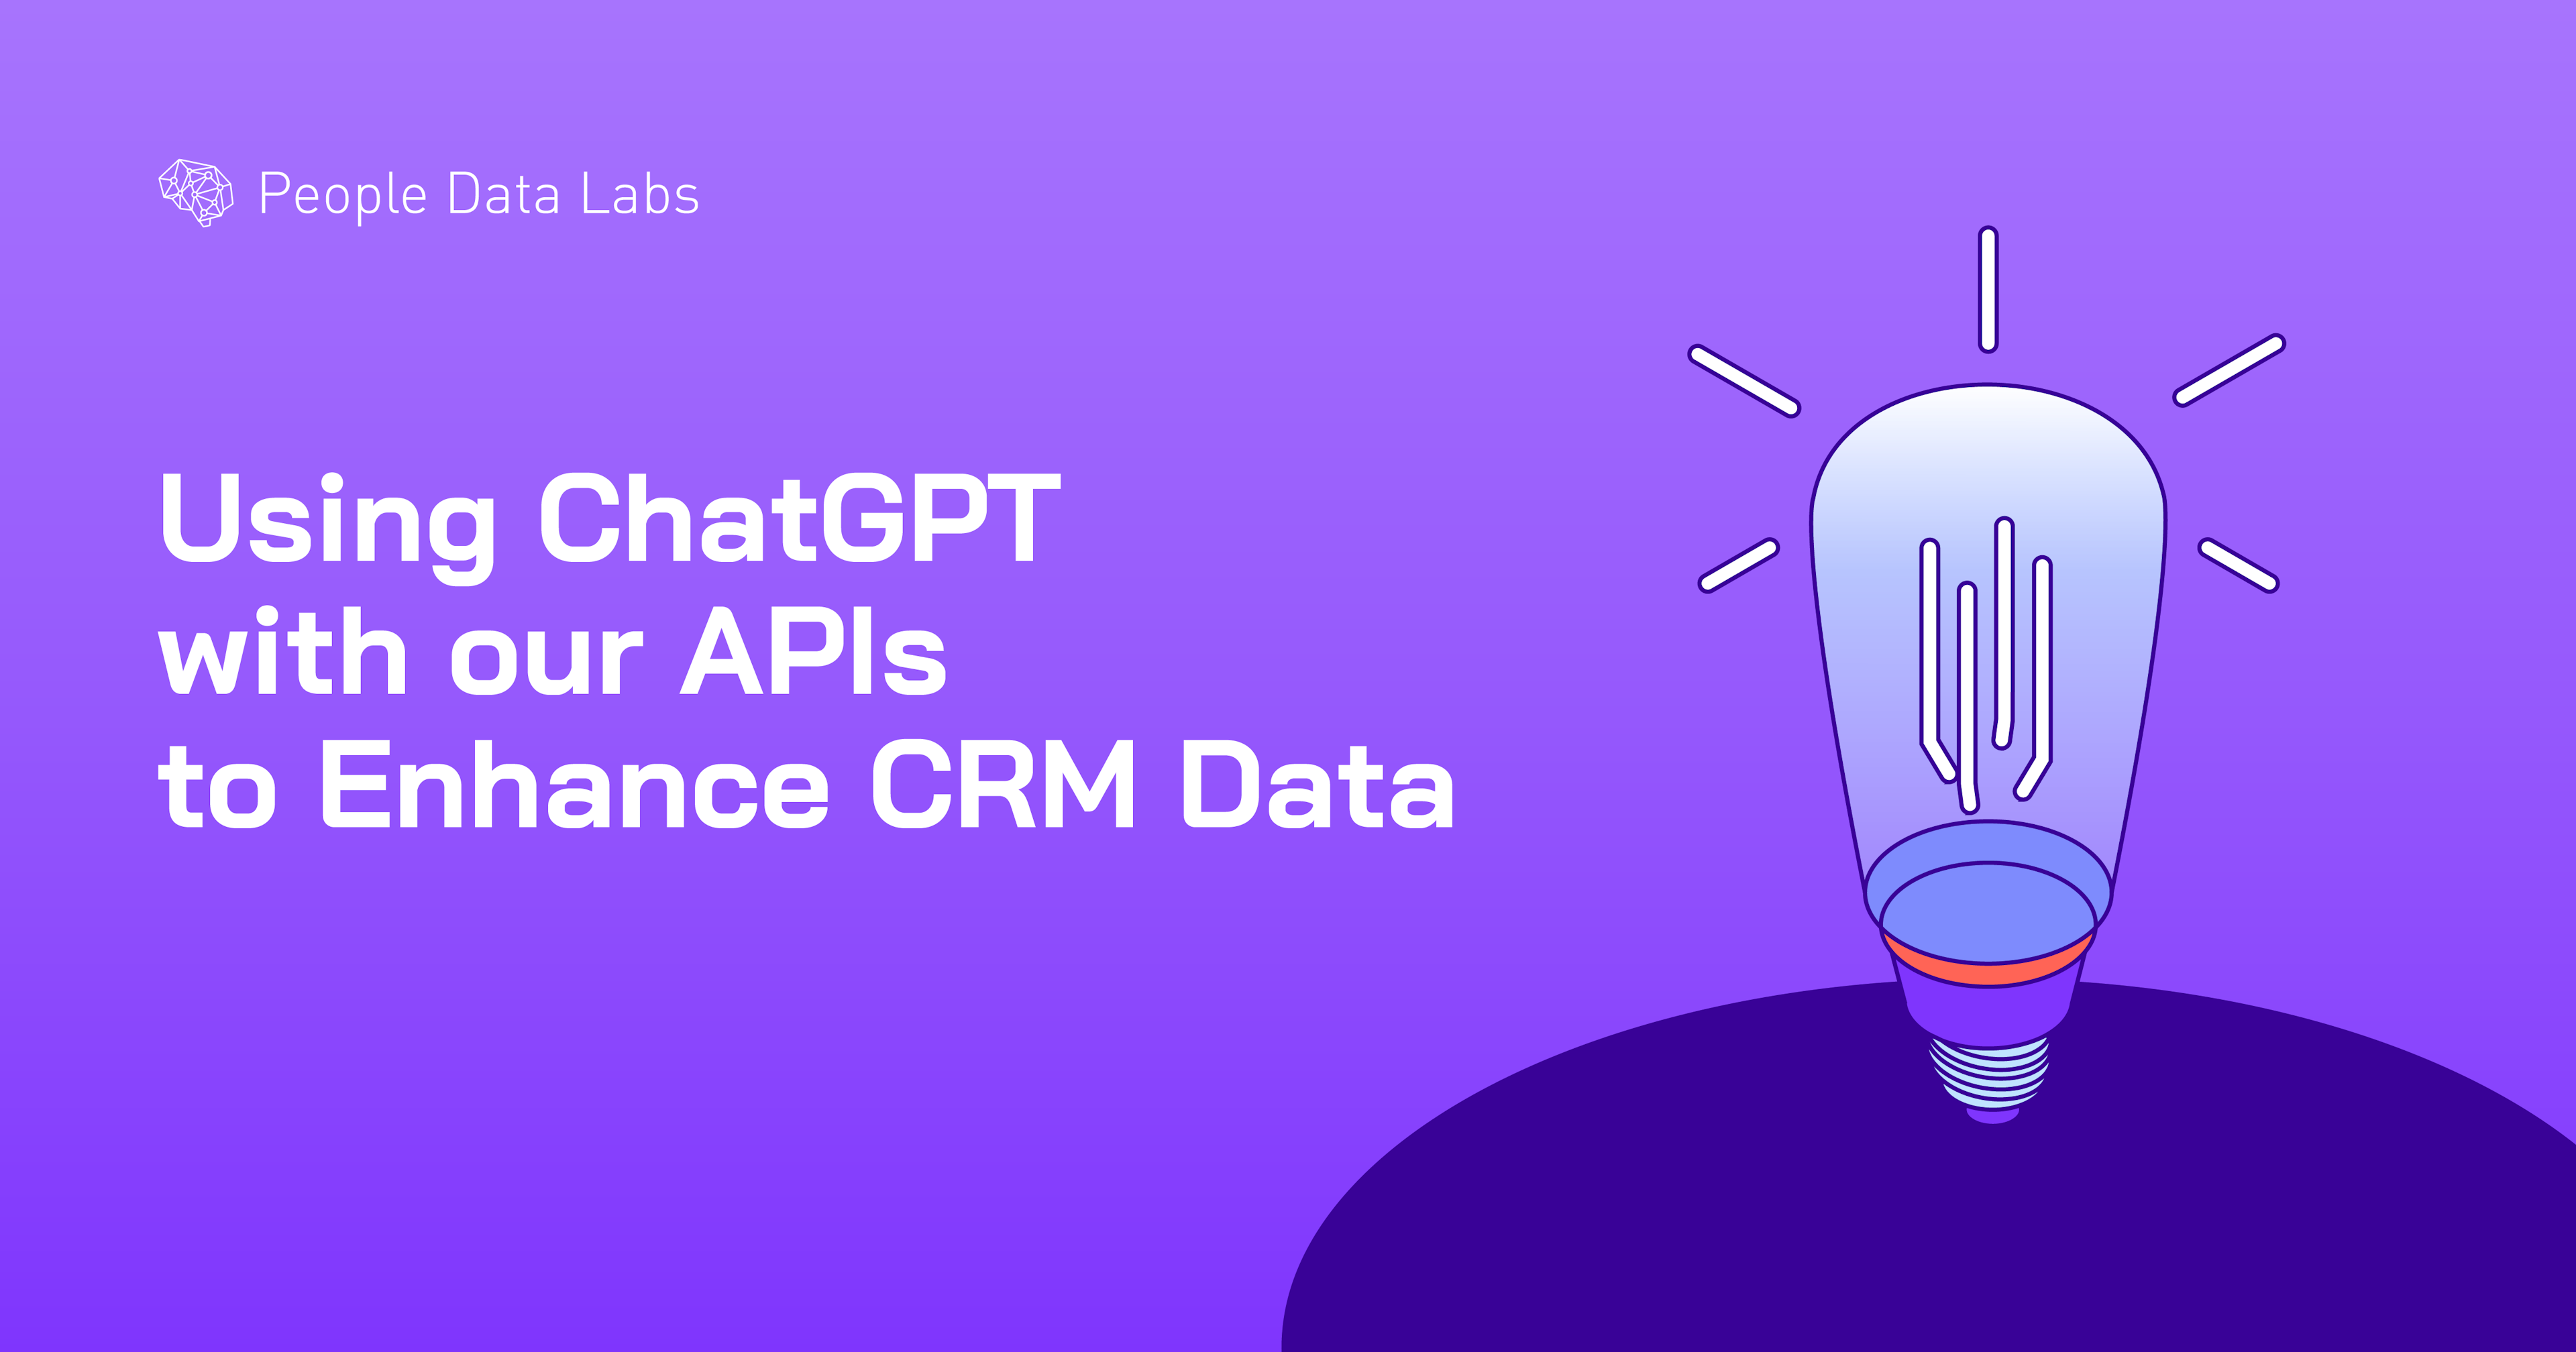 ChatGPT and PDL to Enrich CRM Data